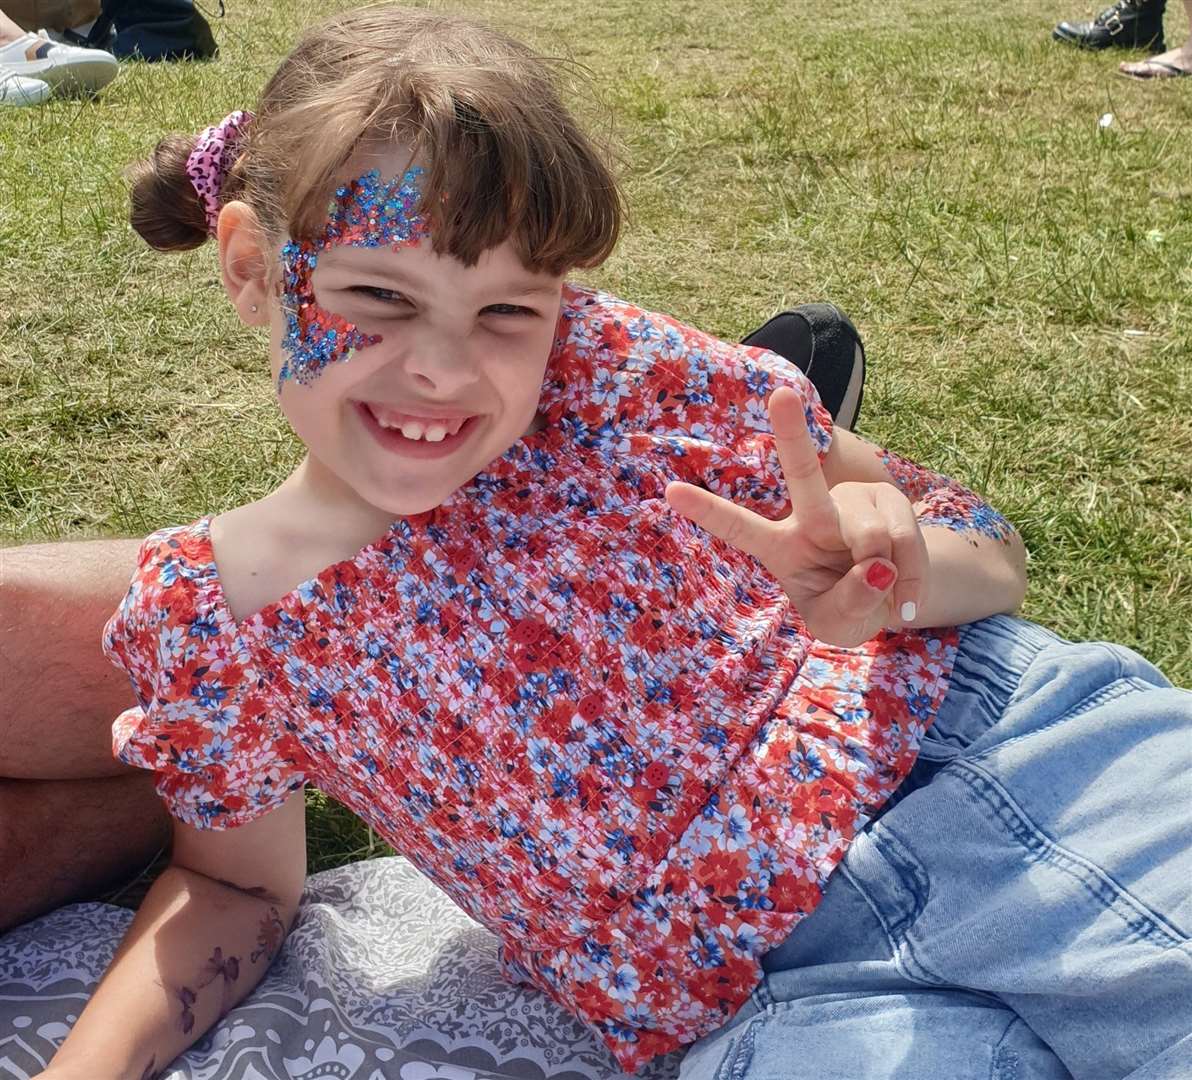 Seven-year-old Maddison celebrated by attending the Mote Park Together Festival with her family. Picture: Louise Woodfine